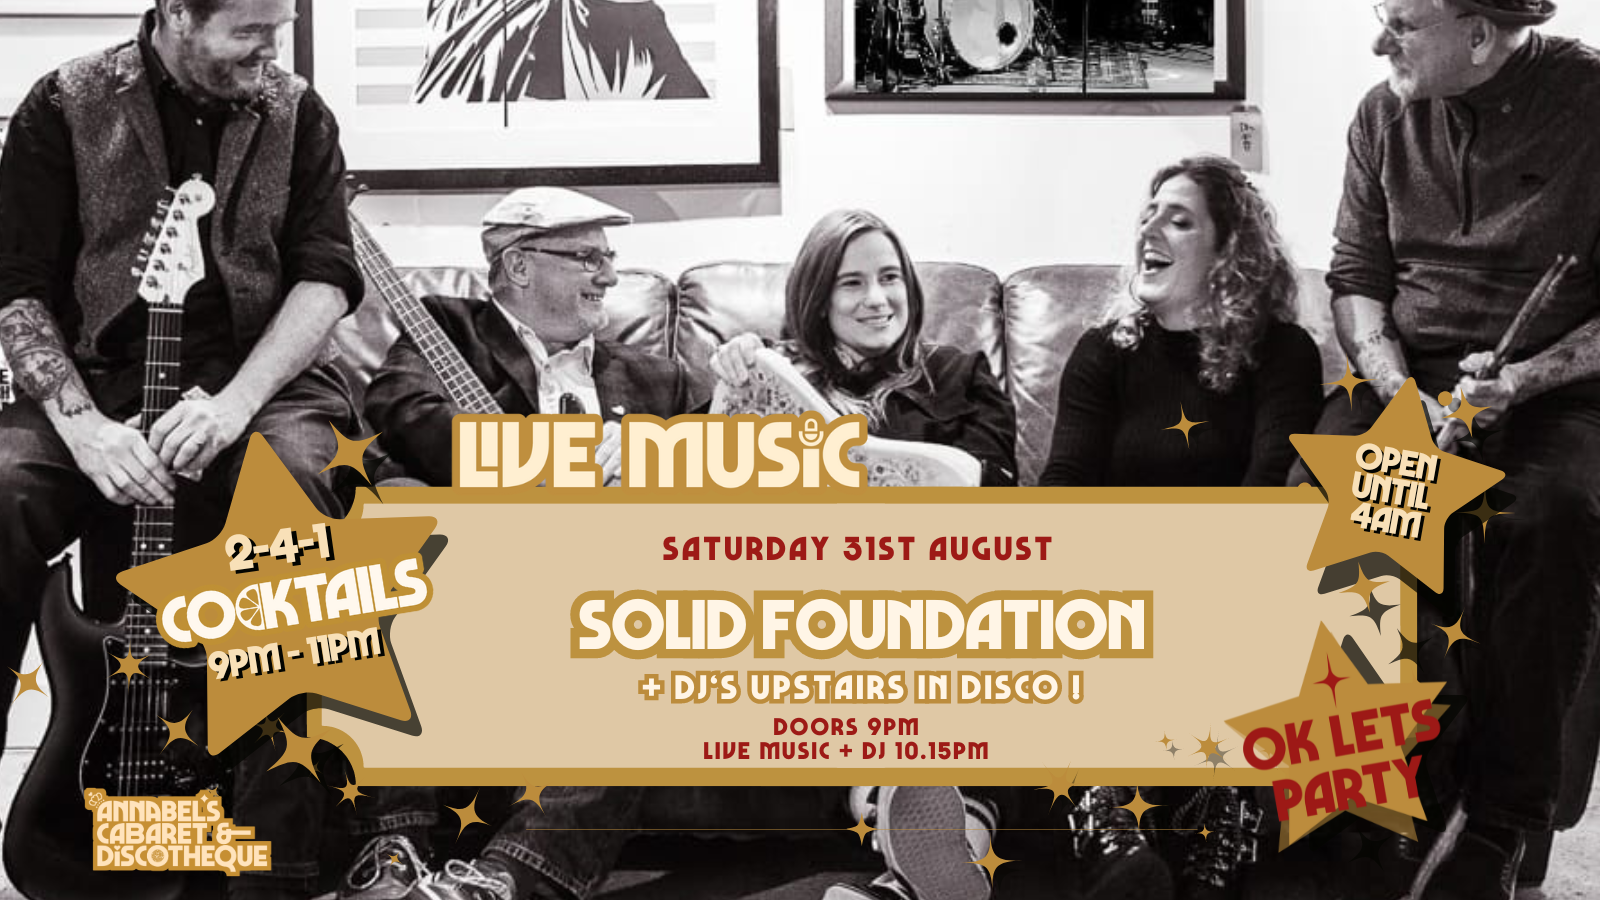 Live Music: SOLID FOUNDATION// Annabel’s Cabaret & Discotheque